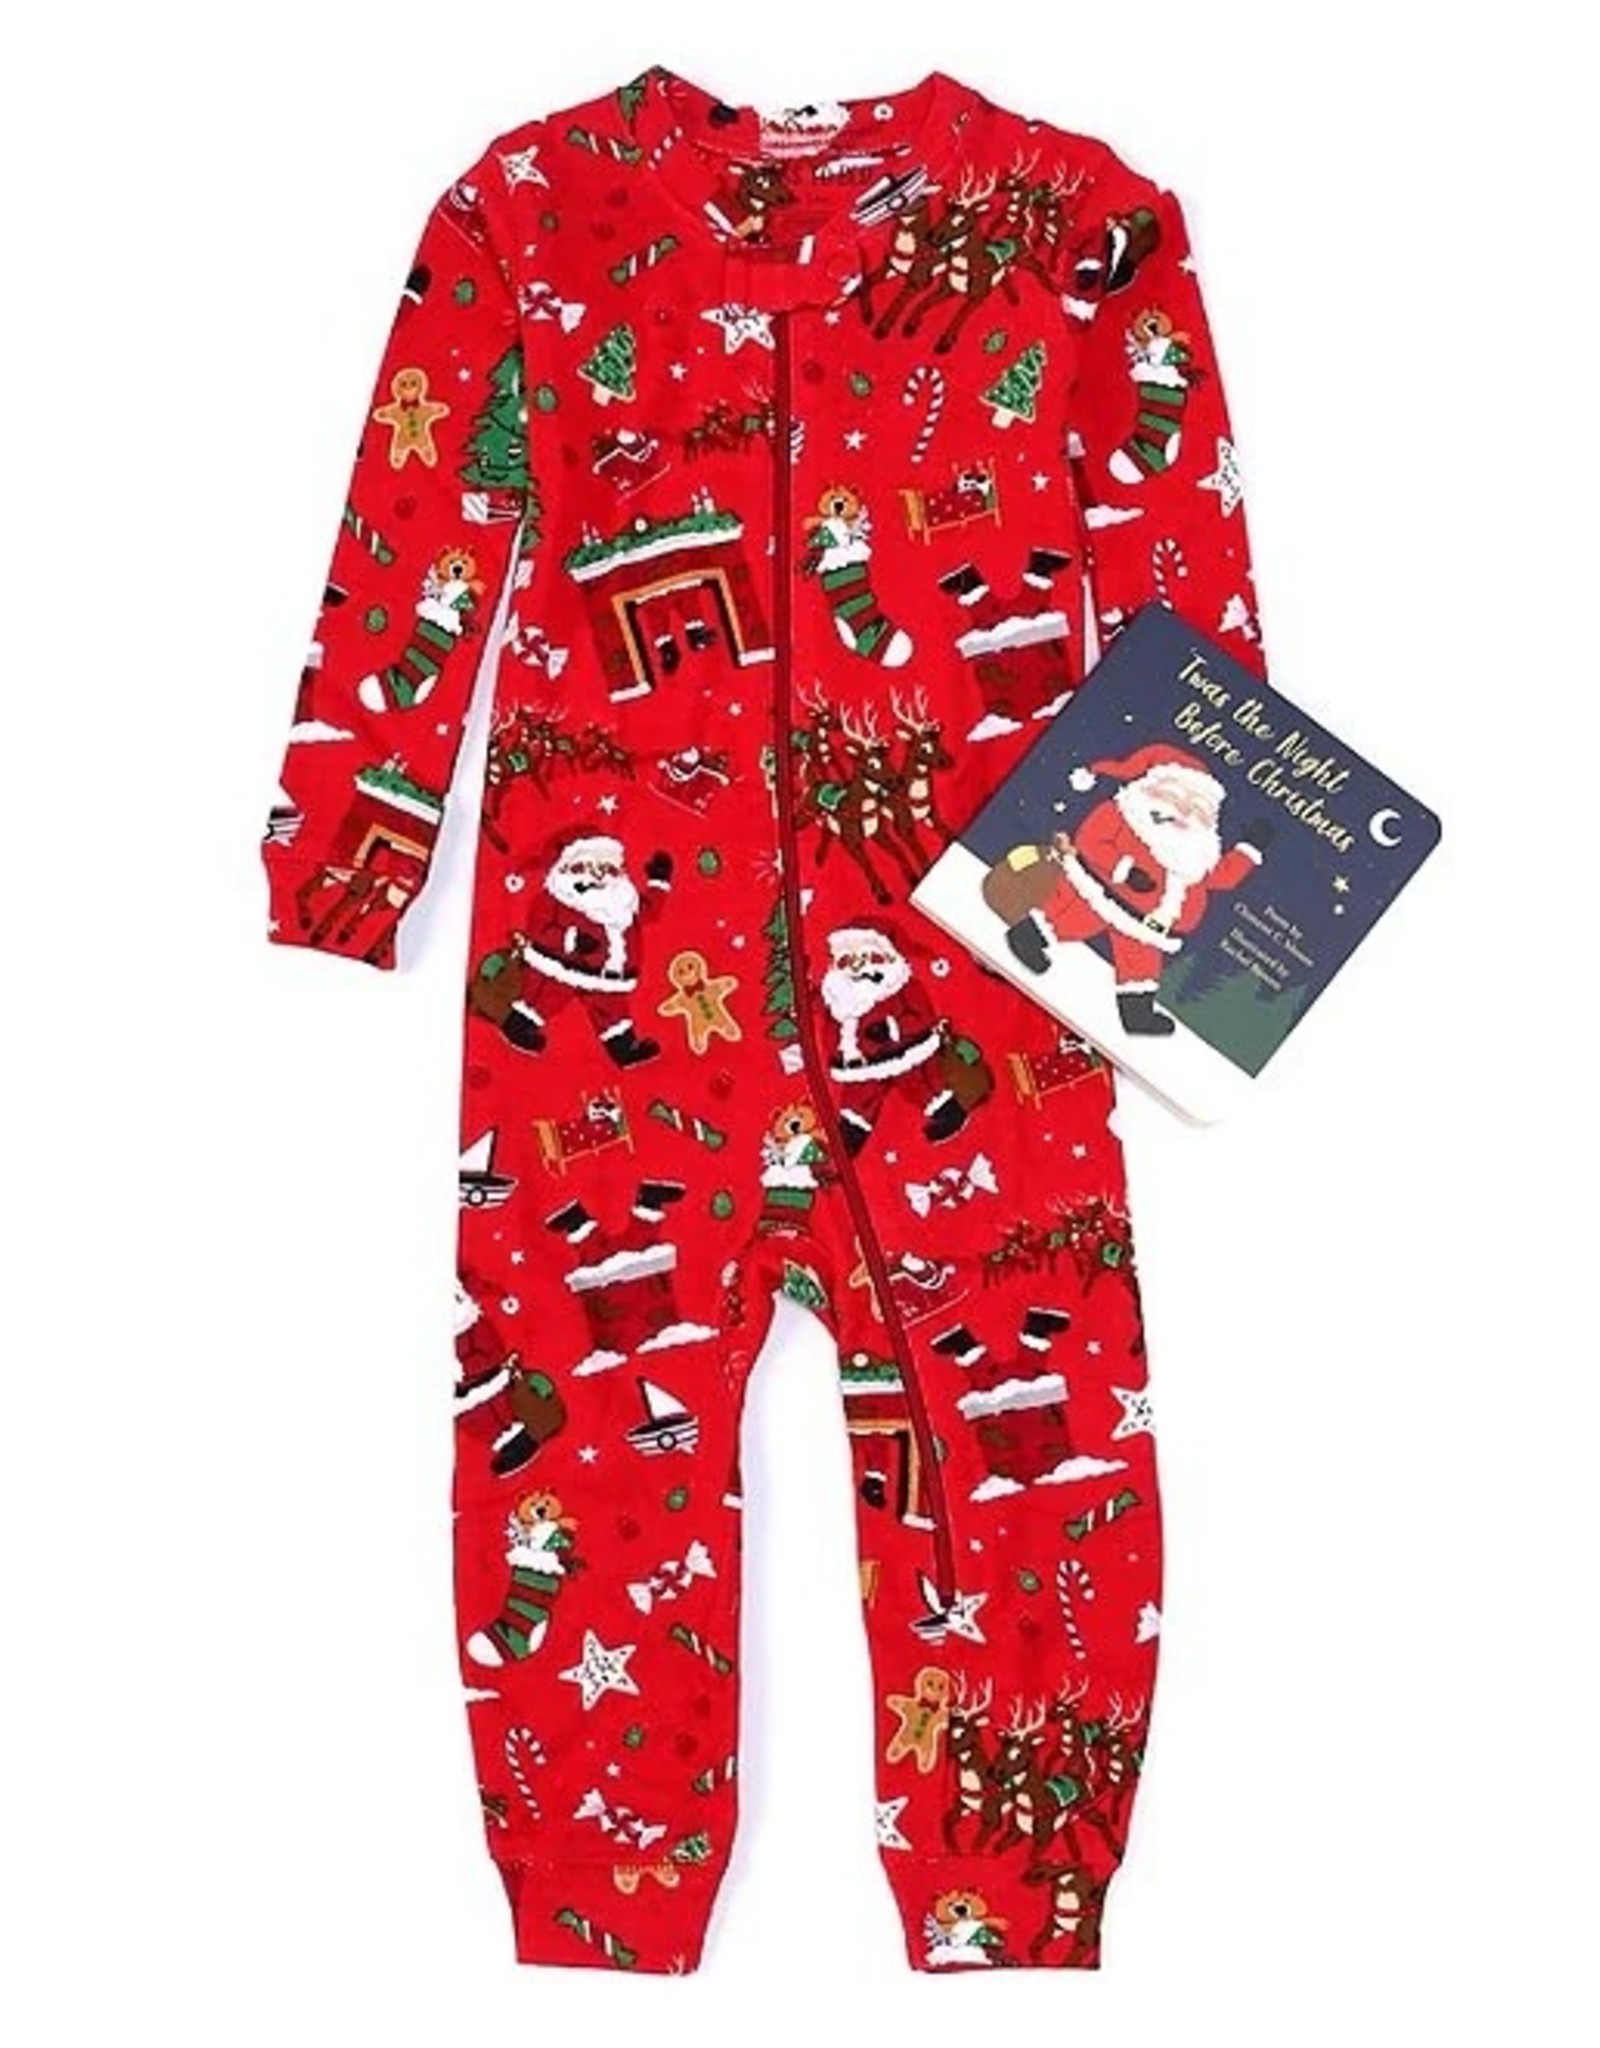 Infant Coverall And Book Set